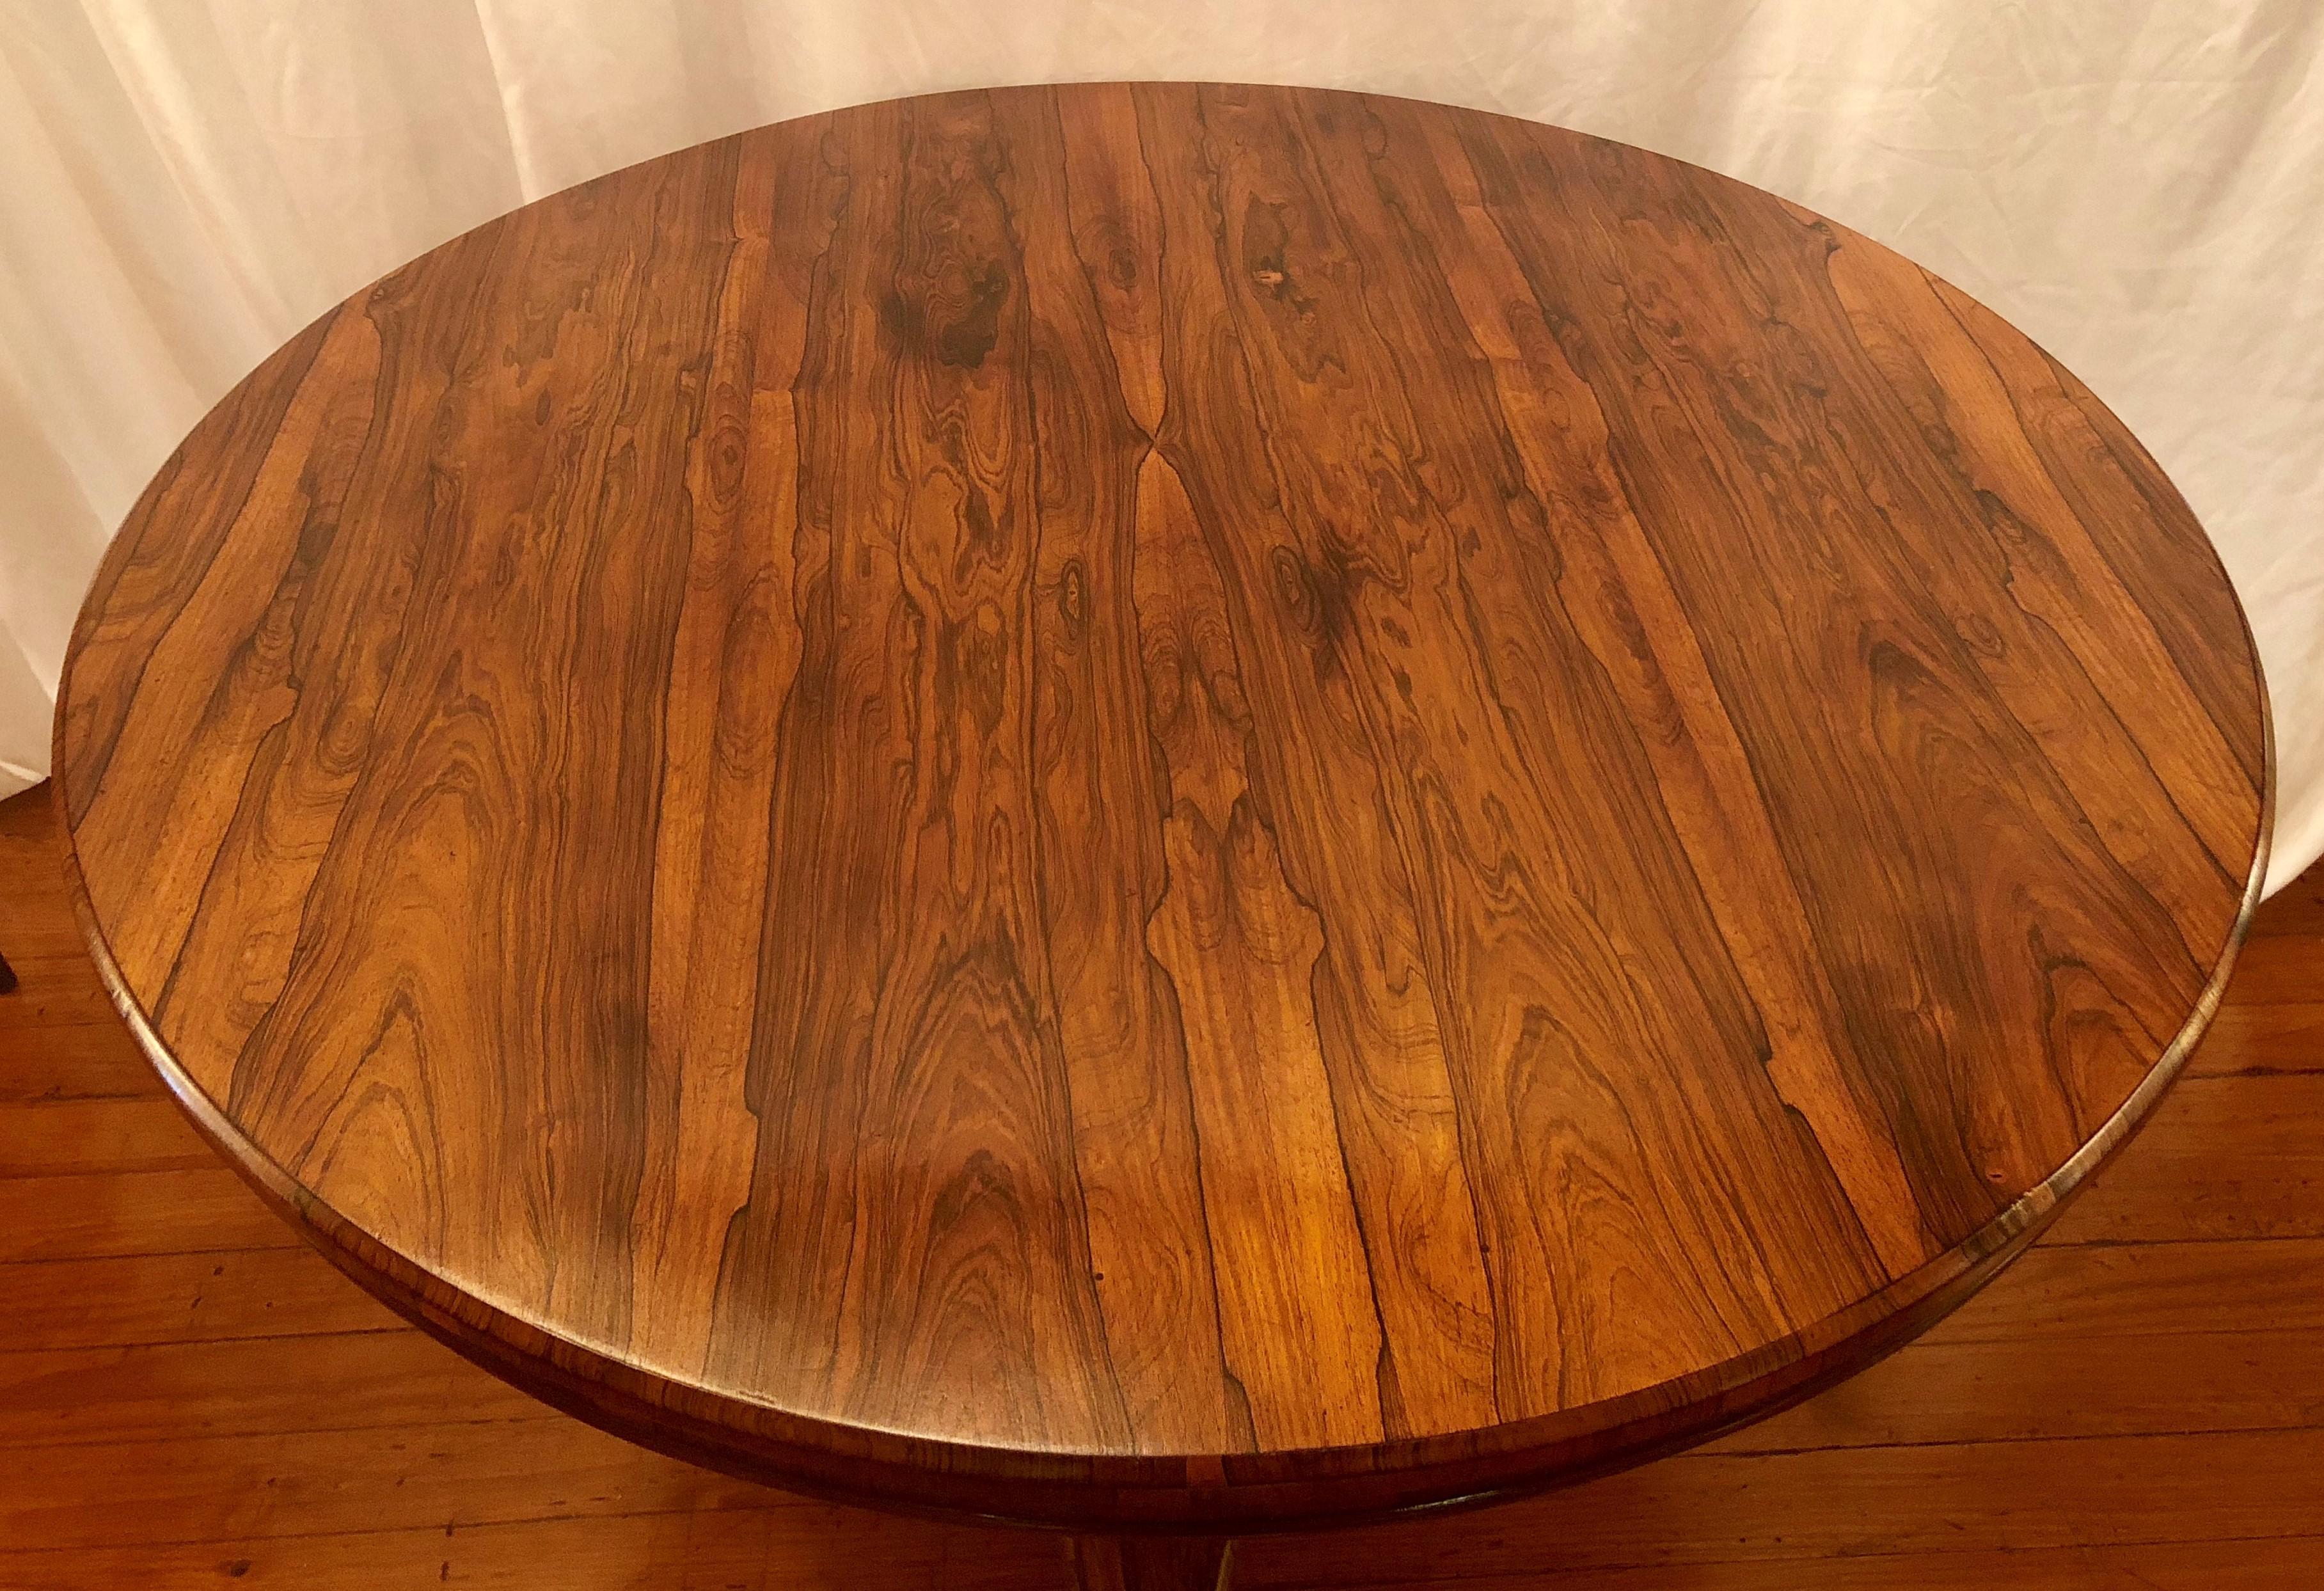 Antique English rosewood center table.